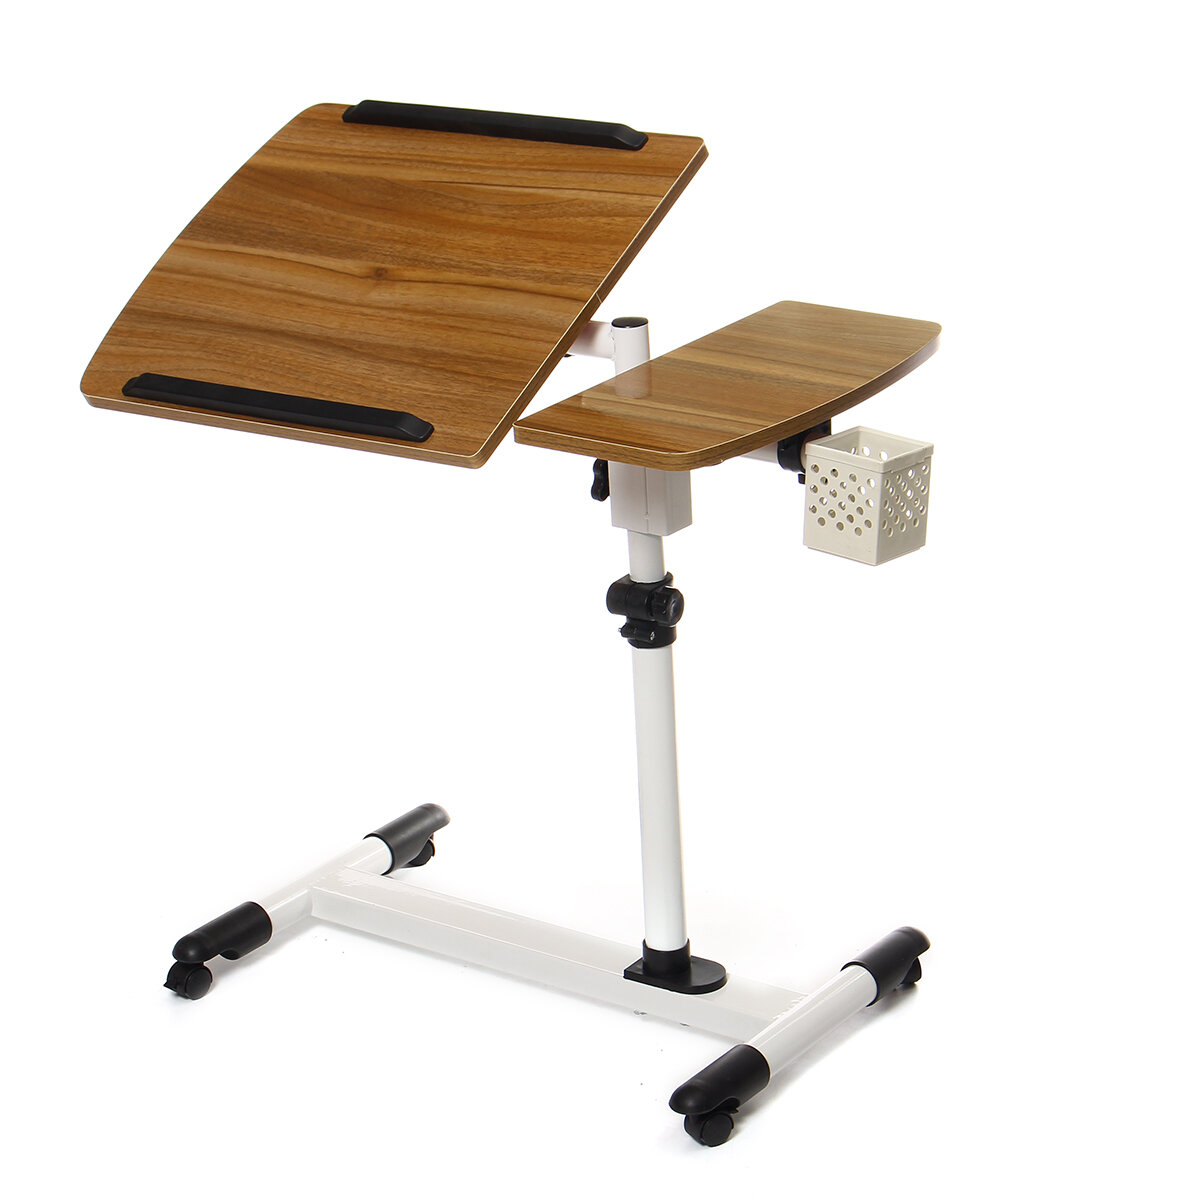 360 Degrees Adjustable Angle & Height Rolling Notebook Laptop Desk Stand Over Bed Sofa Table